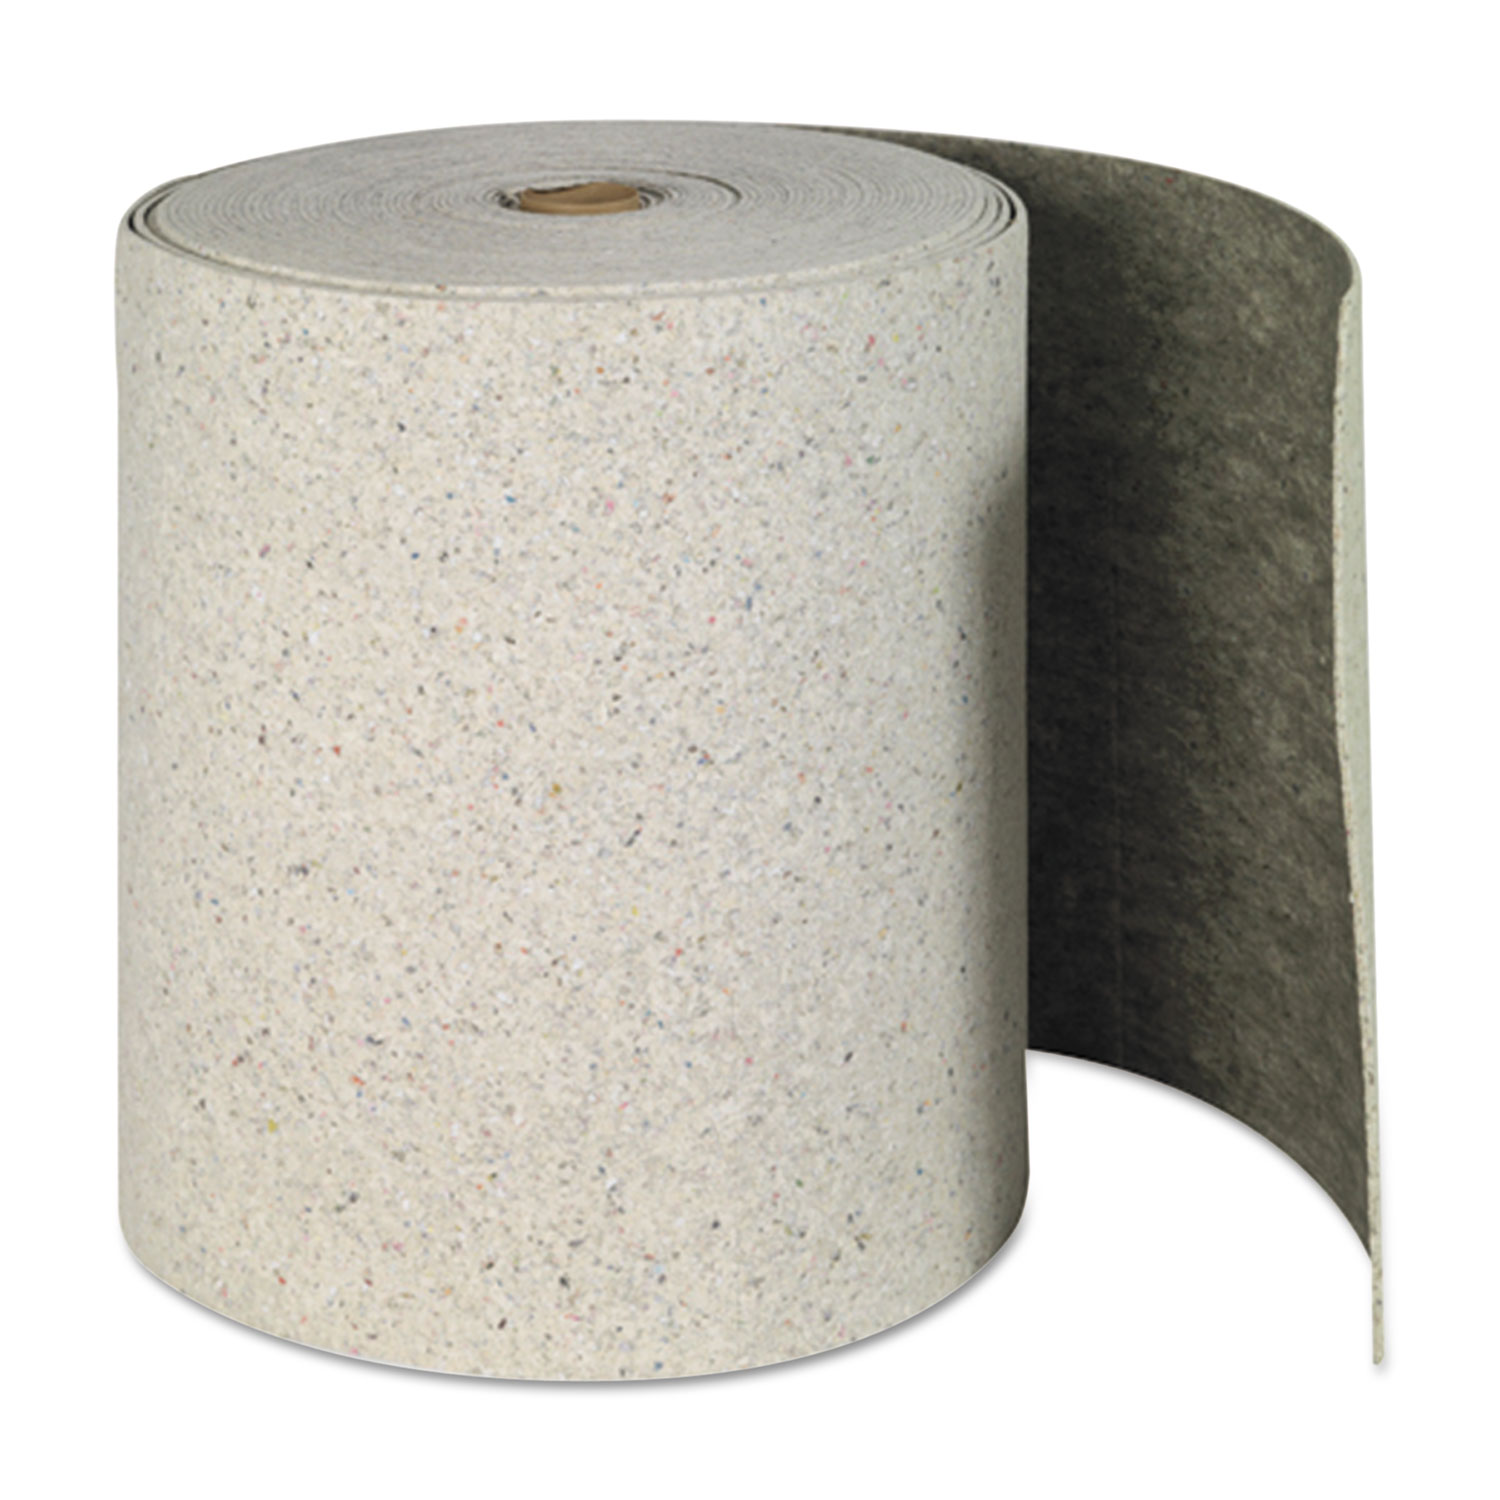 Re-Form Plus Sorbent-Pad Roll, 62gal, 28 1/2 x 150ft, Gray